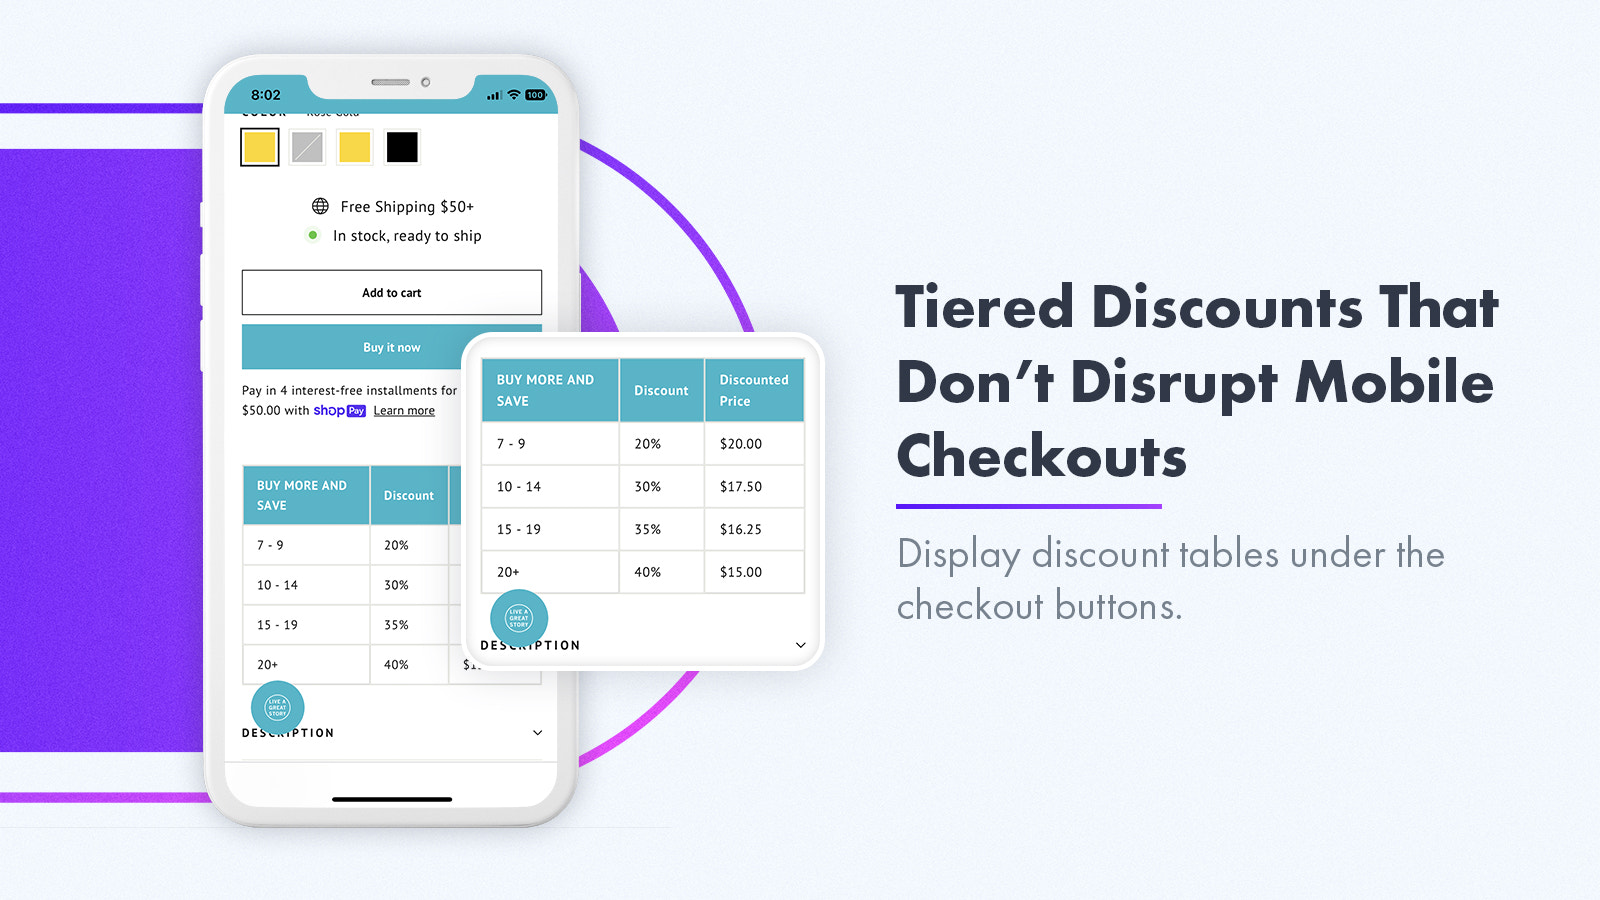 Give a breakdown of discounts in the cart